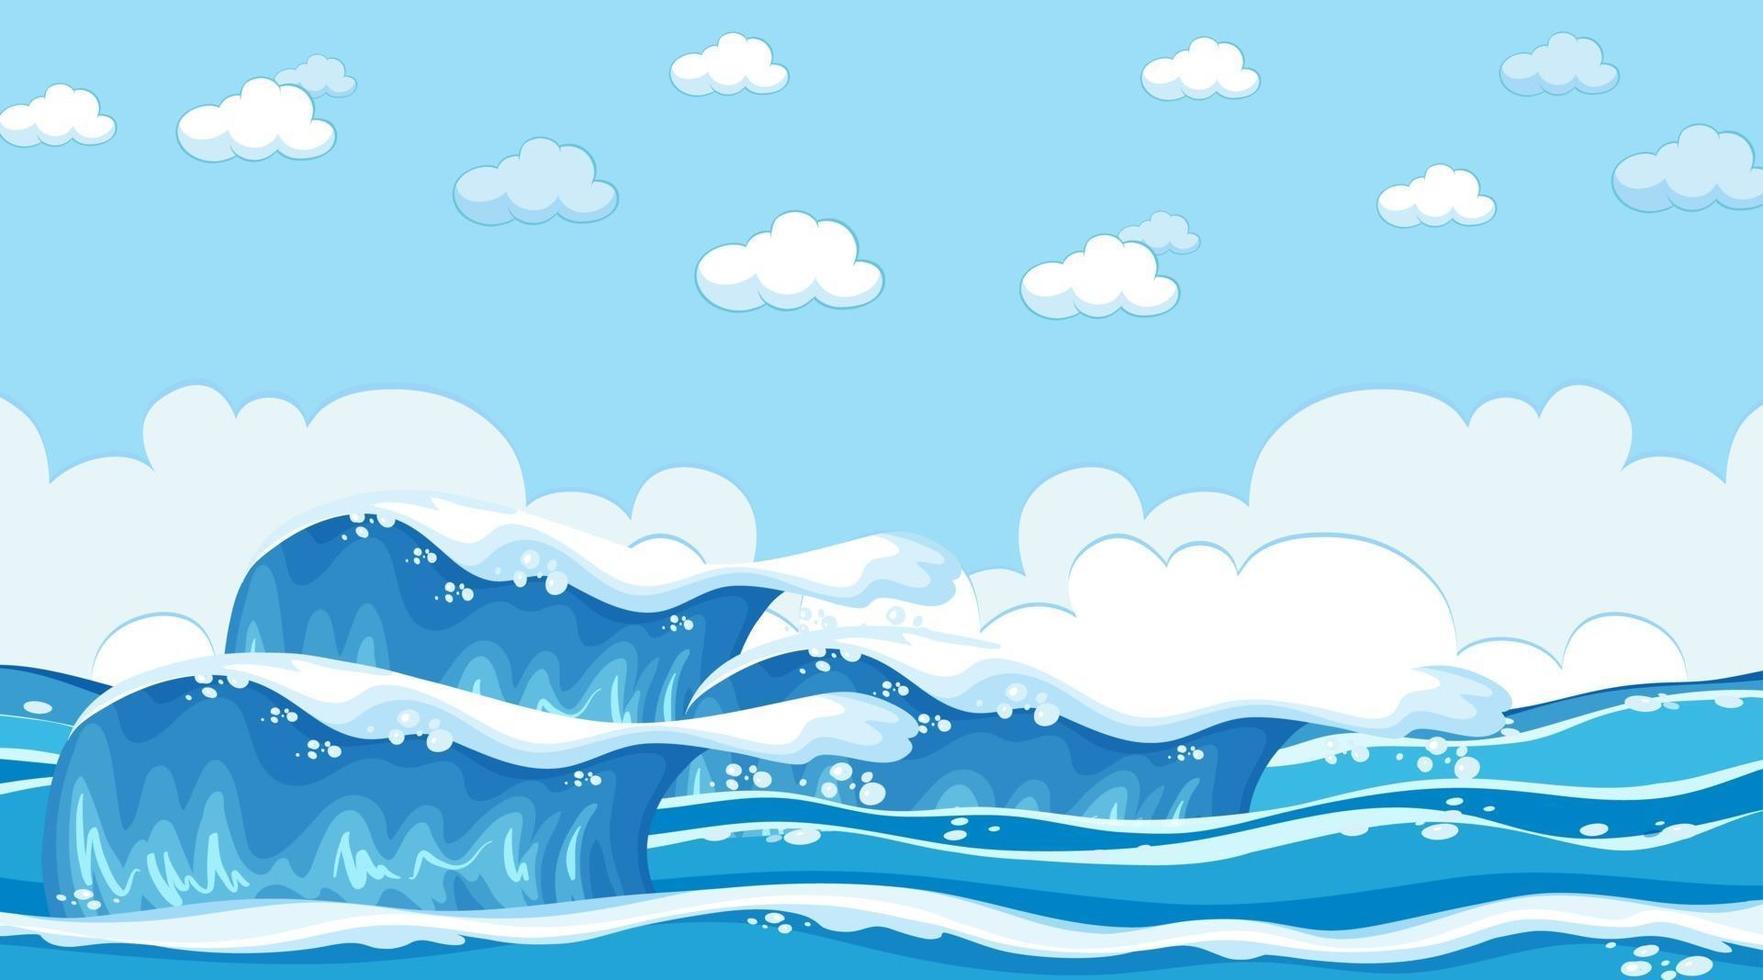 Beach landscape at day time scene with ocean wave vector